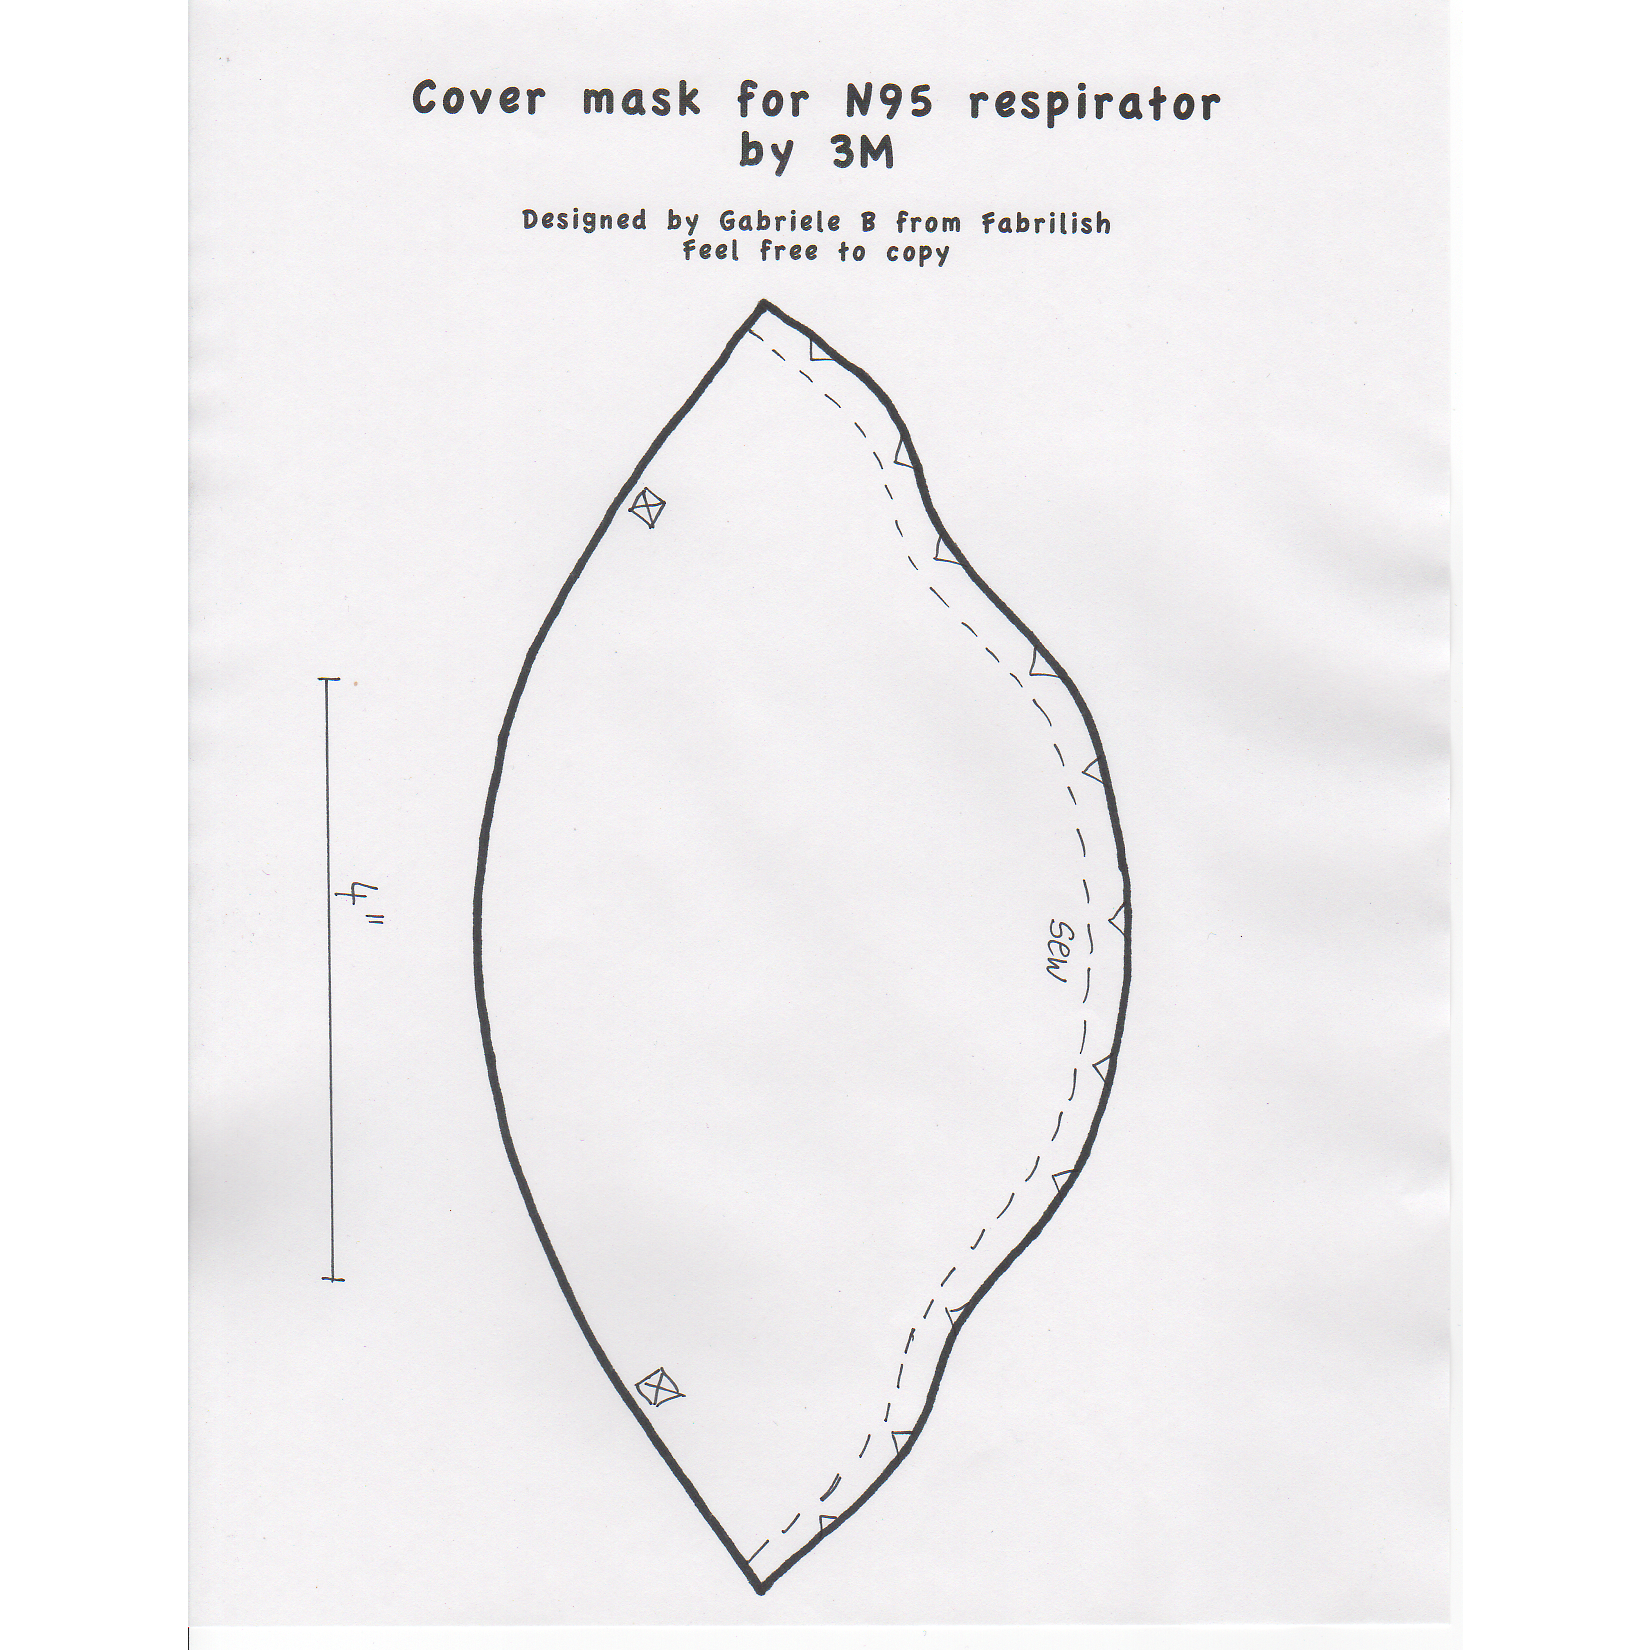 Pattern for Cover Mask for N95 Respirator